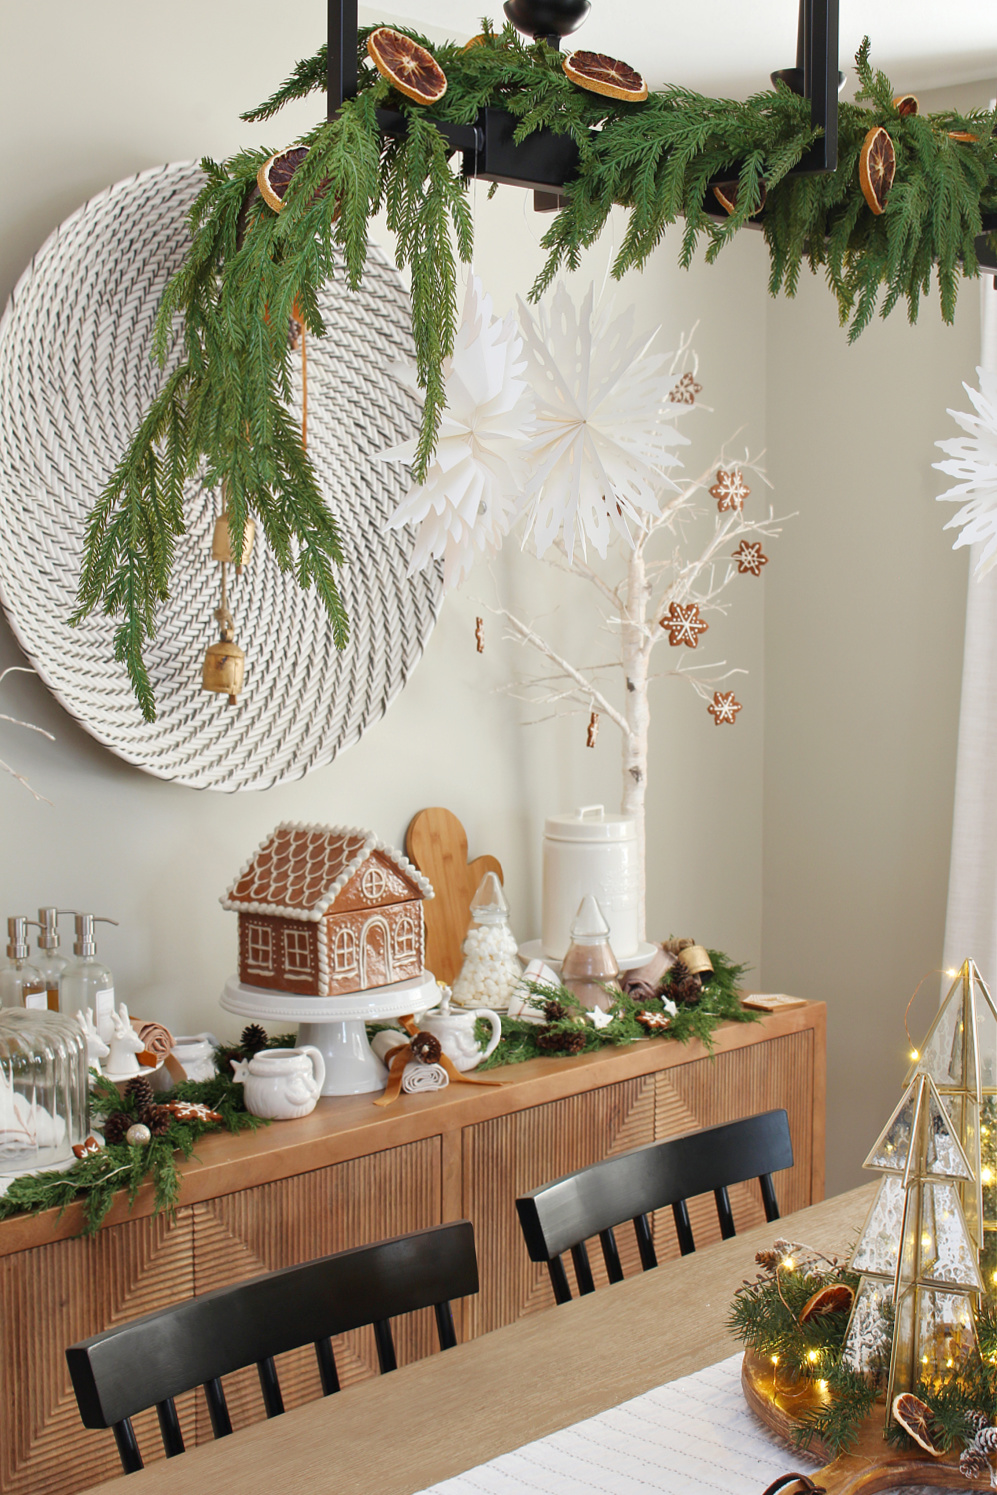 Modern dining room decorated for Christmas with a gingerbread house inspired theme.